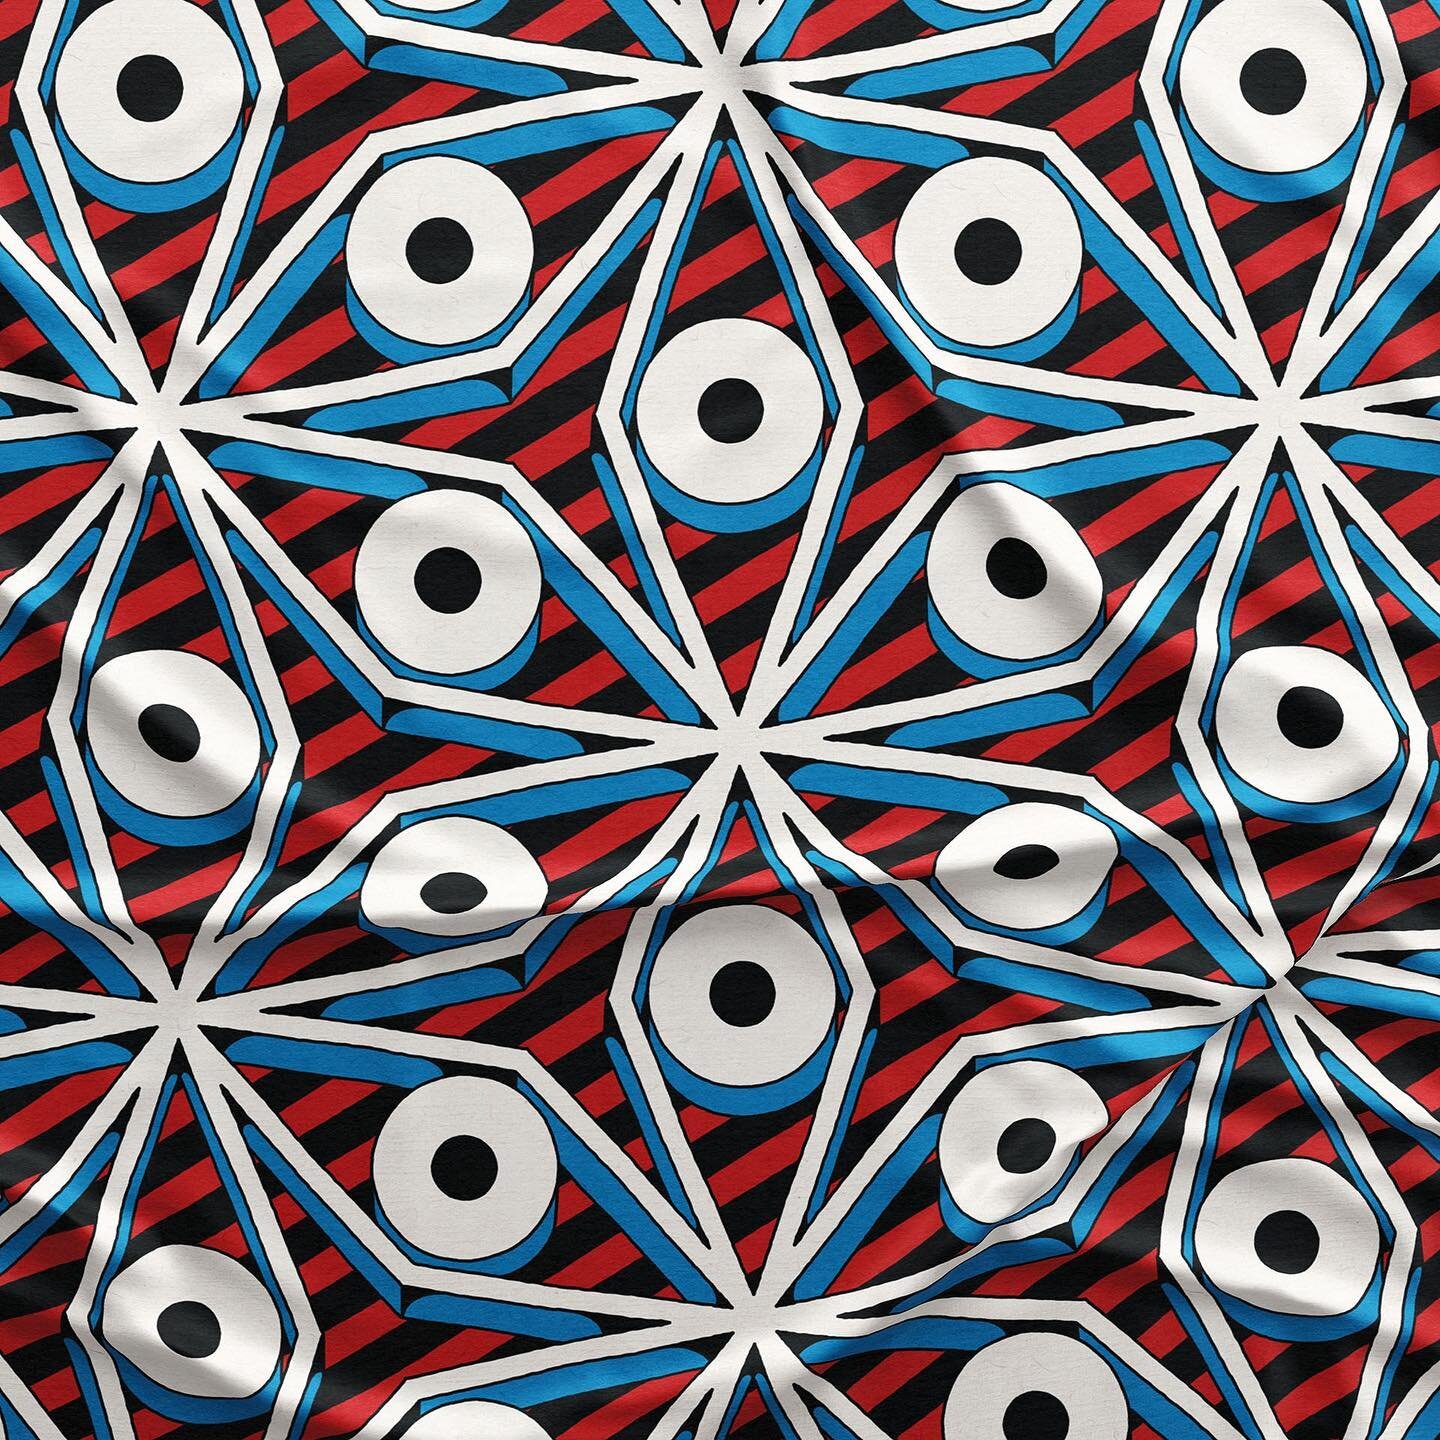 #surfacepattern #repeat #repeatpattern #graphic #finstapattern #finstagraphics #eyes #psychedelic #3d #stripes